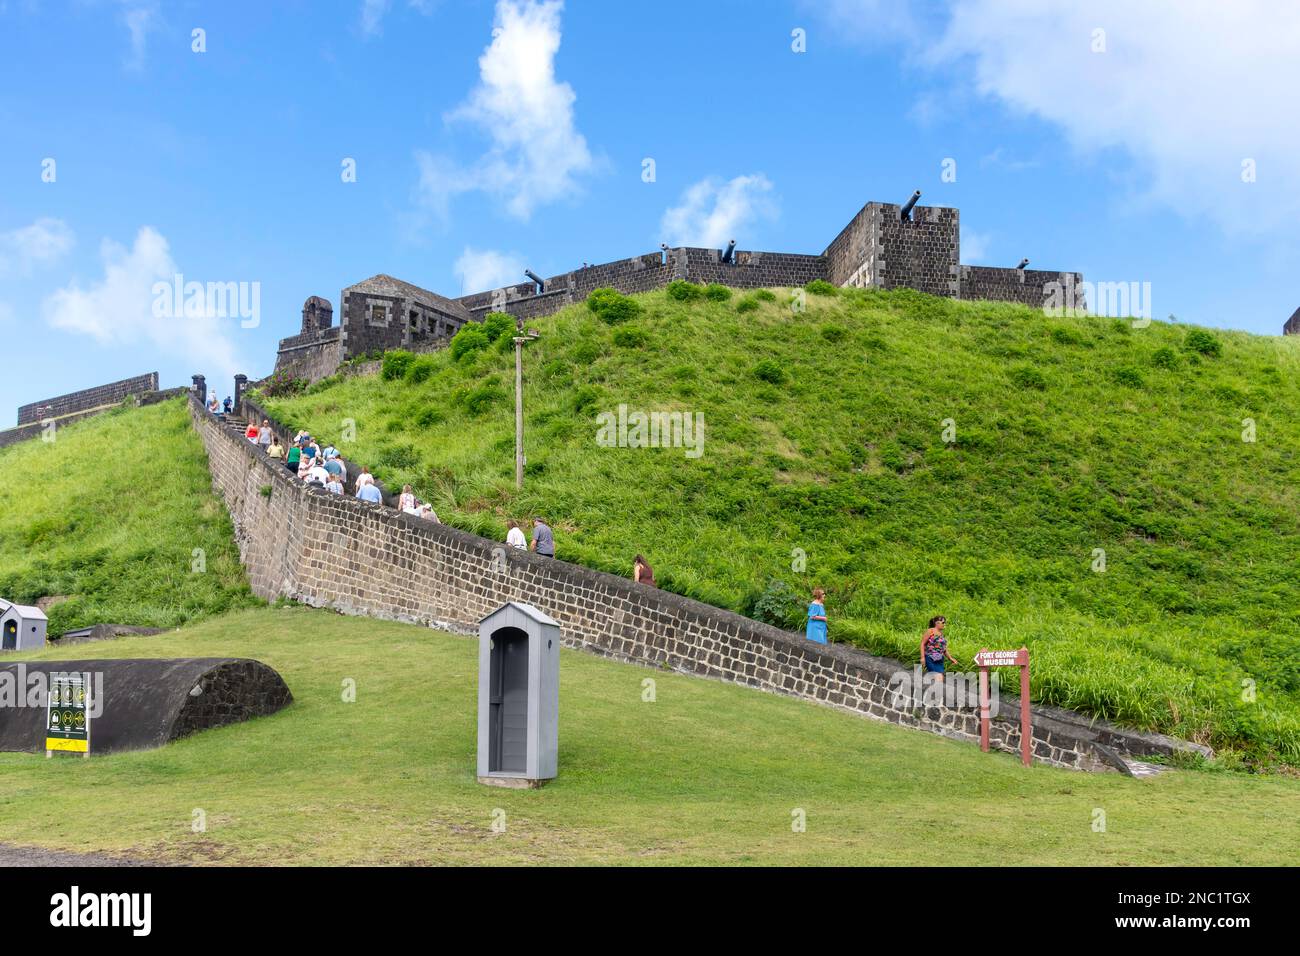 A pochi passi da Fort George Citadel, Brimstone Hill Fortress National Park, Sandy Point Town, St Kitts, St. Kitts e Nevis, piccole Antille, Caraibi Foto Stock